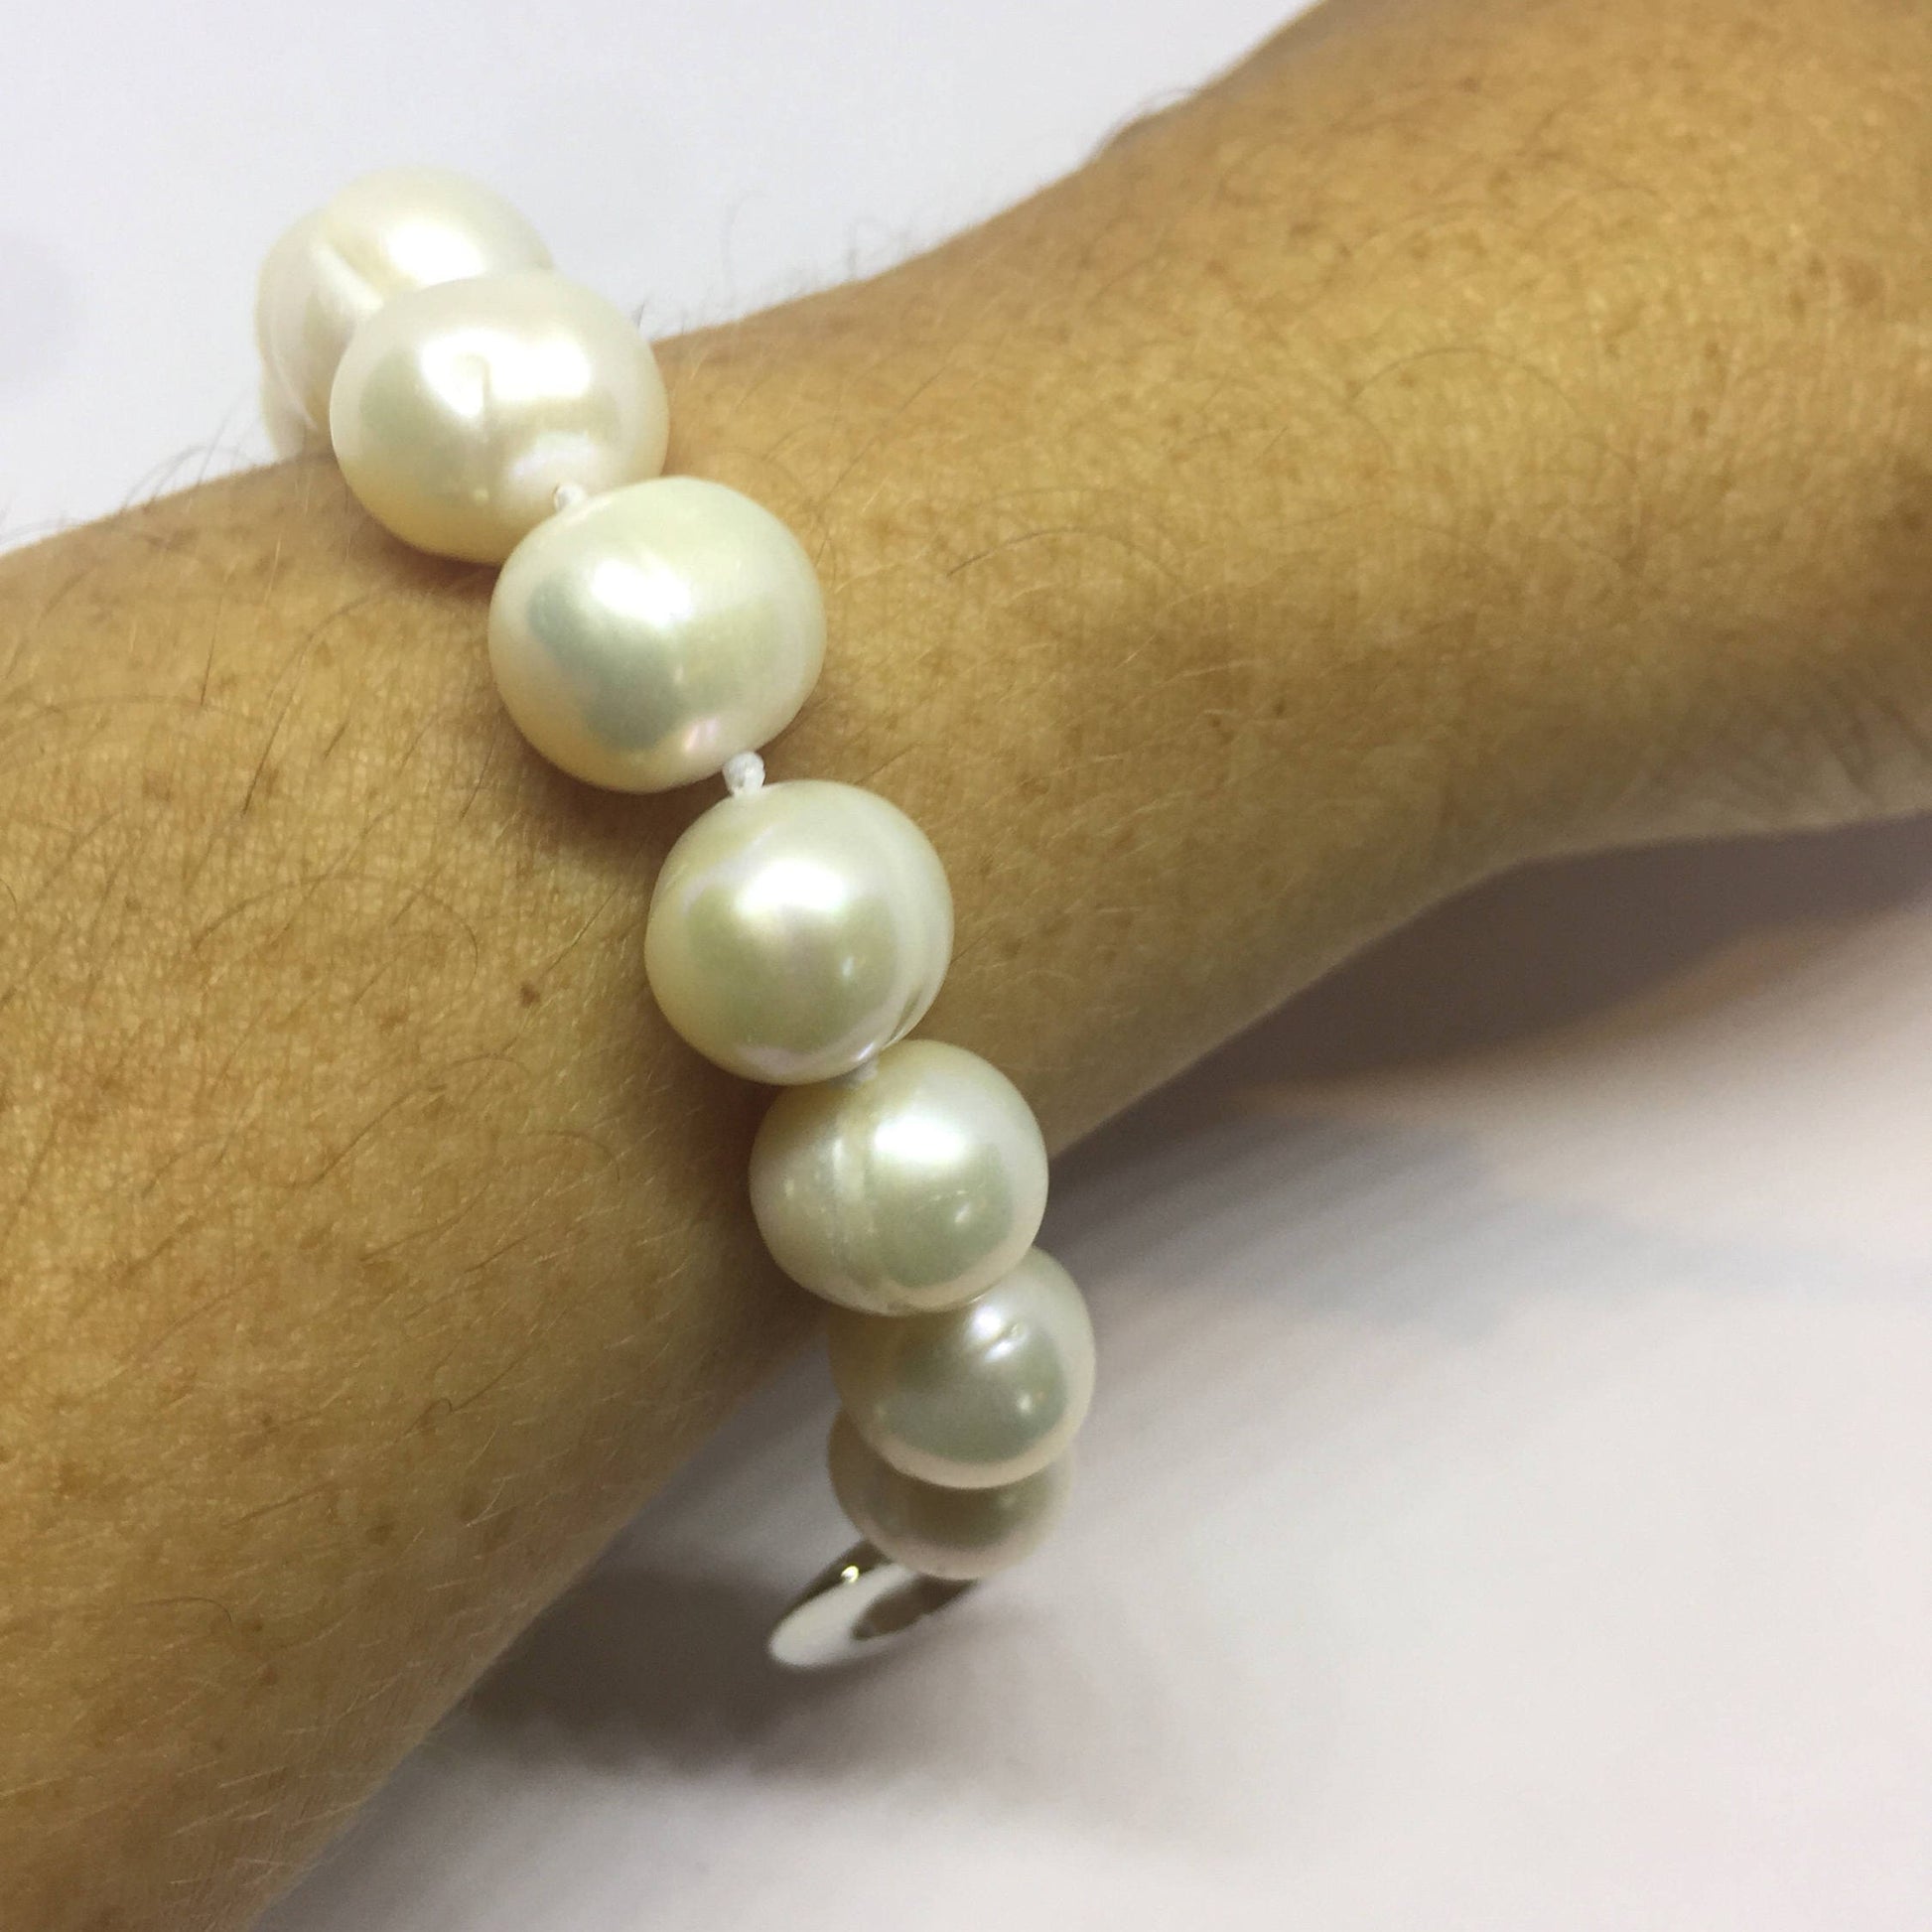 Vintage Pearl Bracelet in 925 Sterling Silver with Heart Toggle